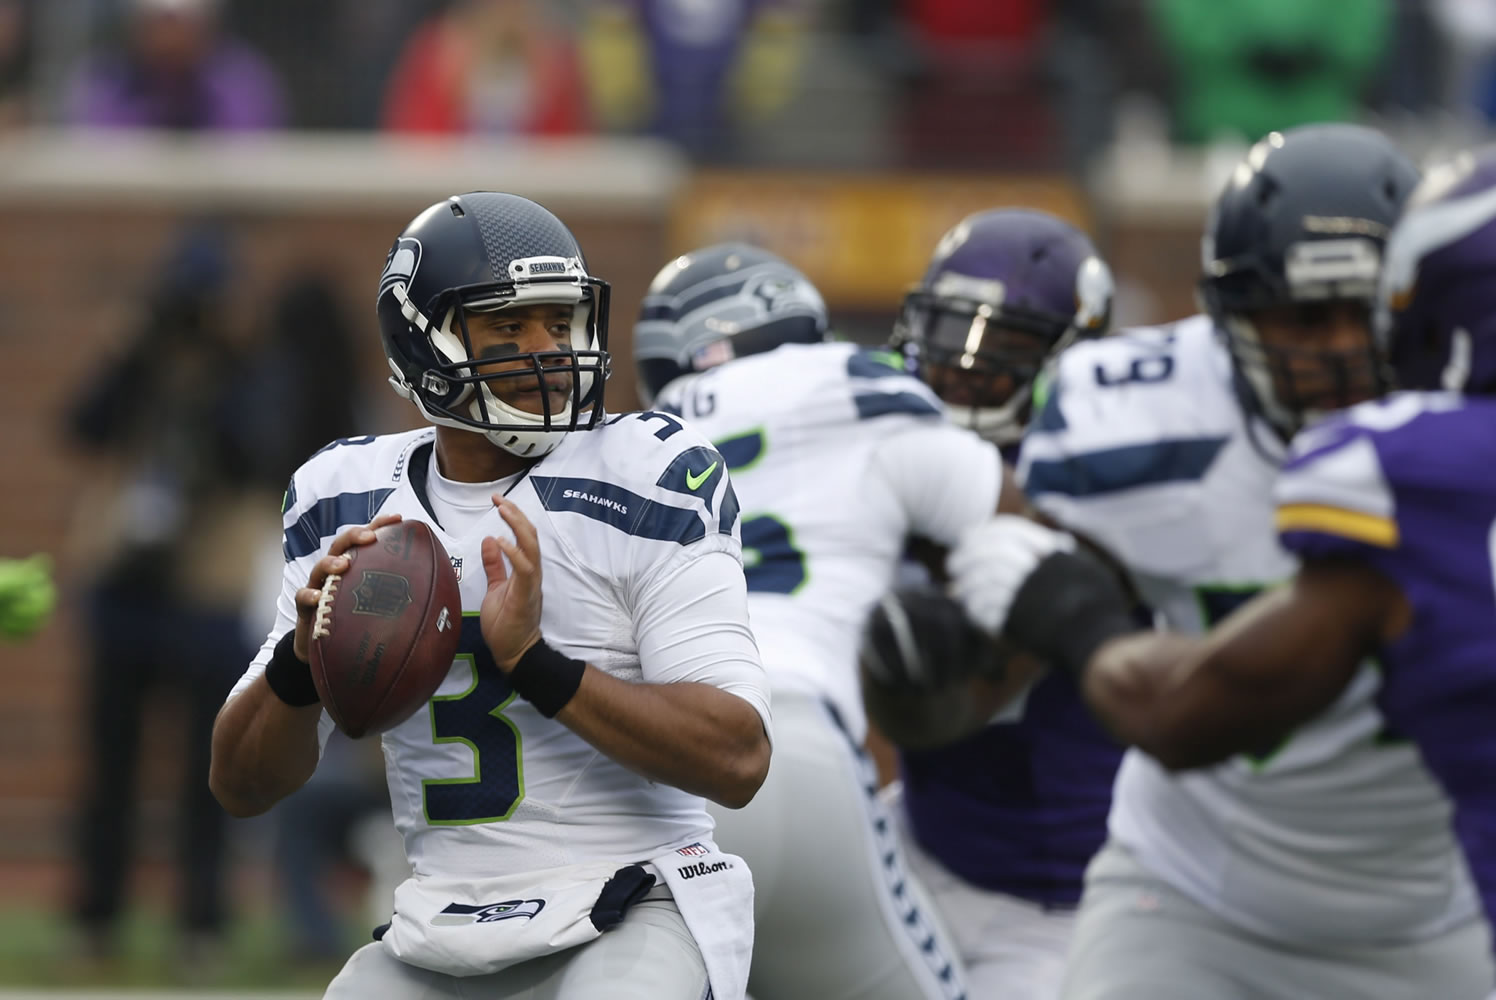 Seattle Seahawks quarterback Russell Wilson (3) looks to throw against the Minnesota Vikings in the first half in Minneapolis. The Seattle Seahawks will play the Baltimore Ravens on Sunday, Dec. 13, 2015.